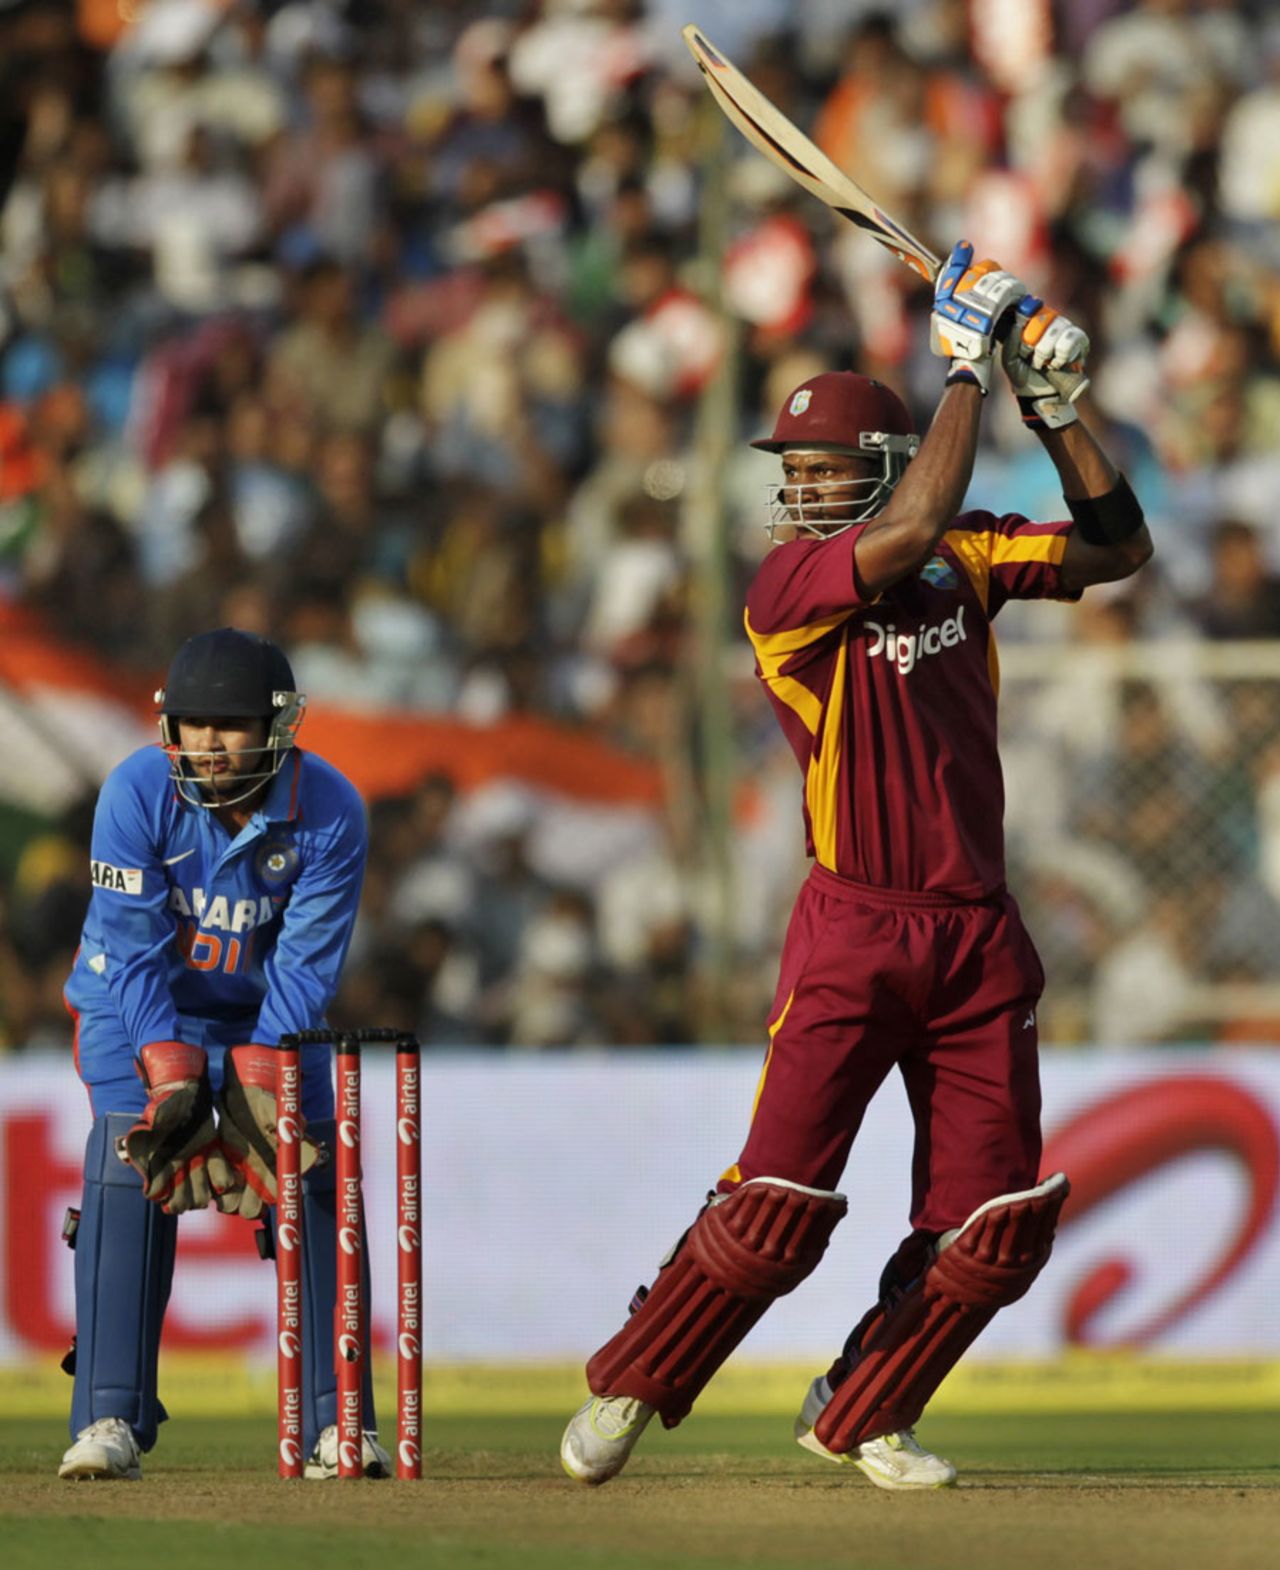 Marlon Samuels punches one to the off side, India v West Indies, 3rd ODI, Ahmedabad, December 5, 2011